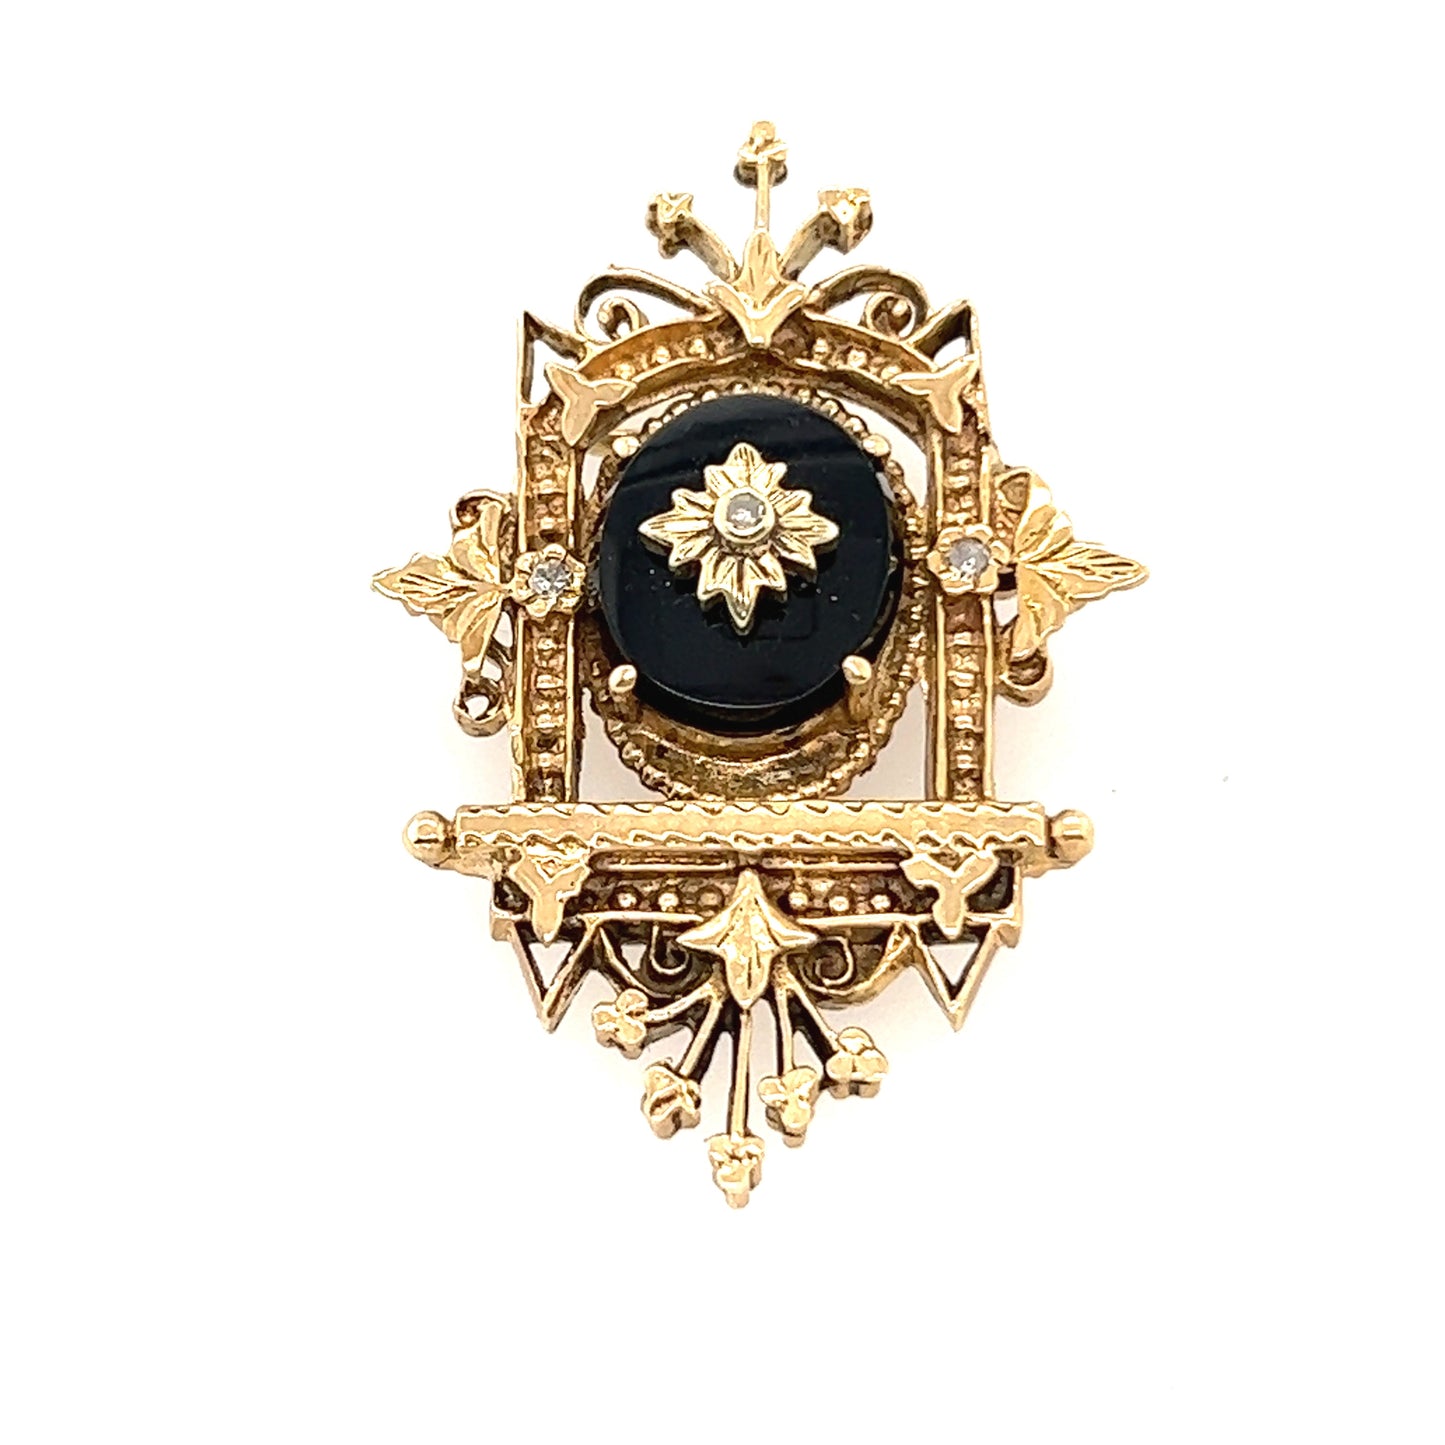 14K Yellow Gold Onyx Diamond Antique Brooch from 1850s’.